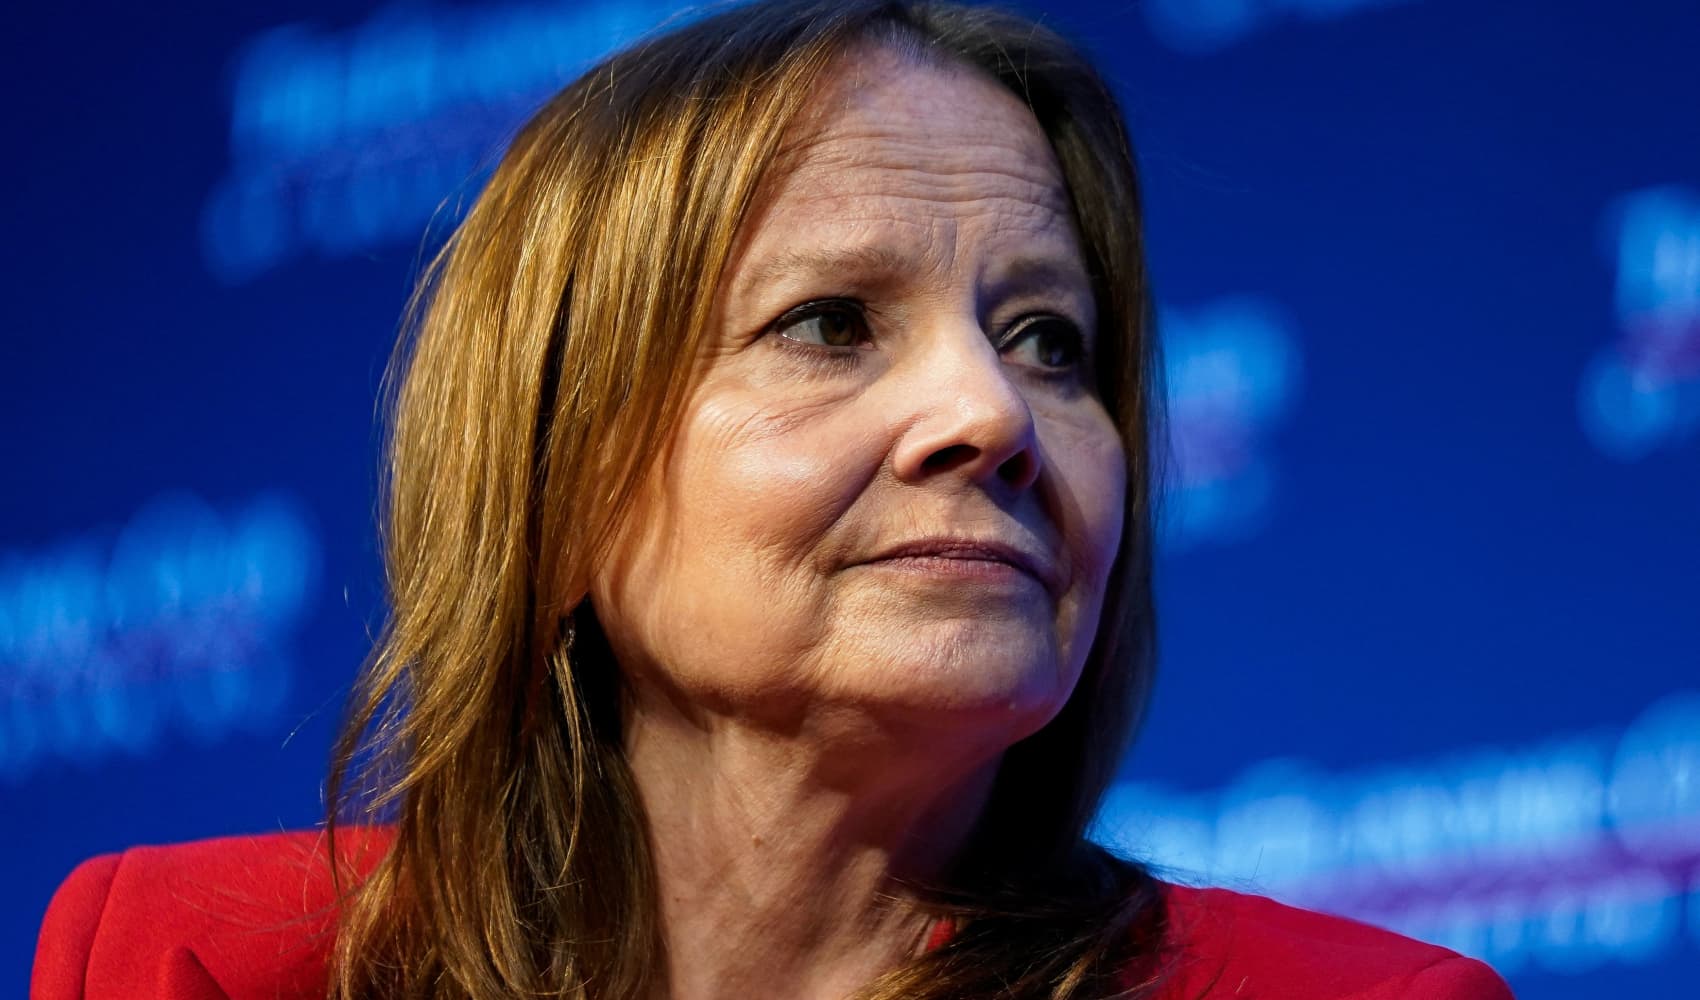 GM CEO Mary Barra says she has no plans to retire soon as automaker's transformation continues